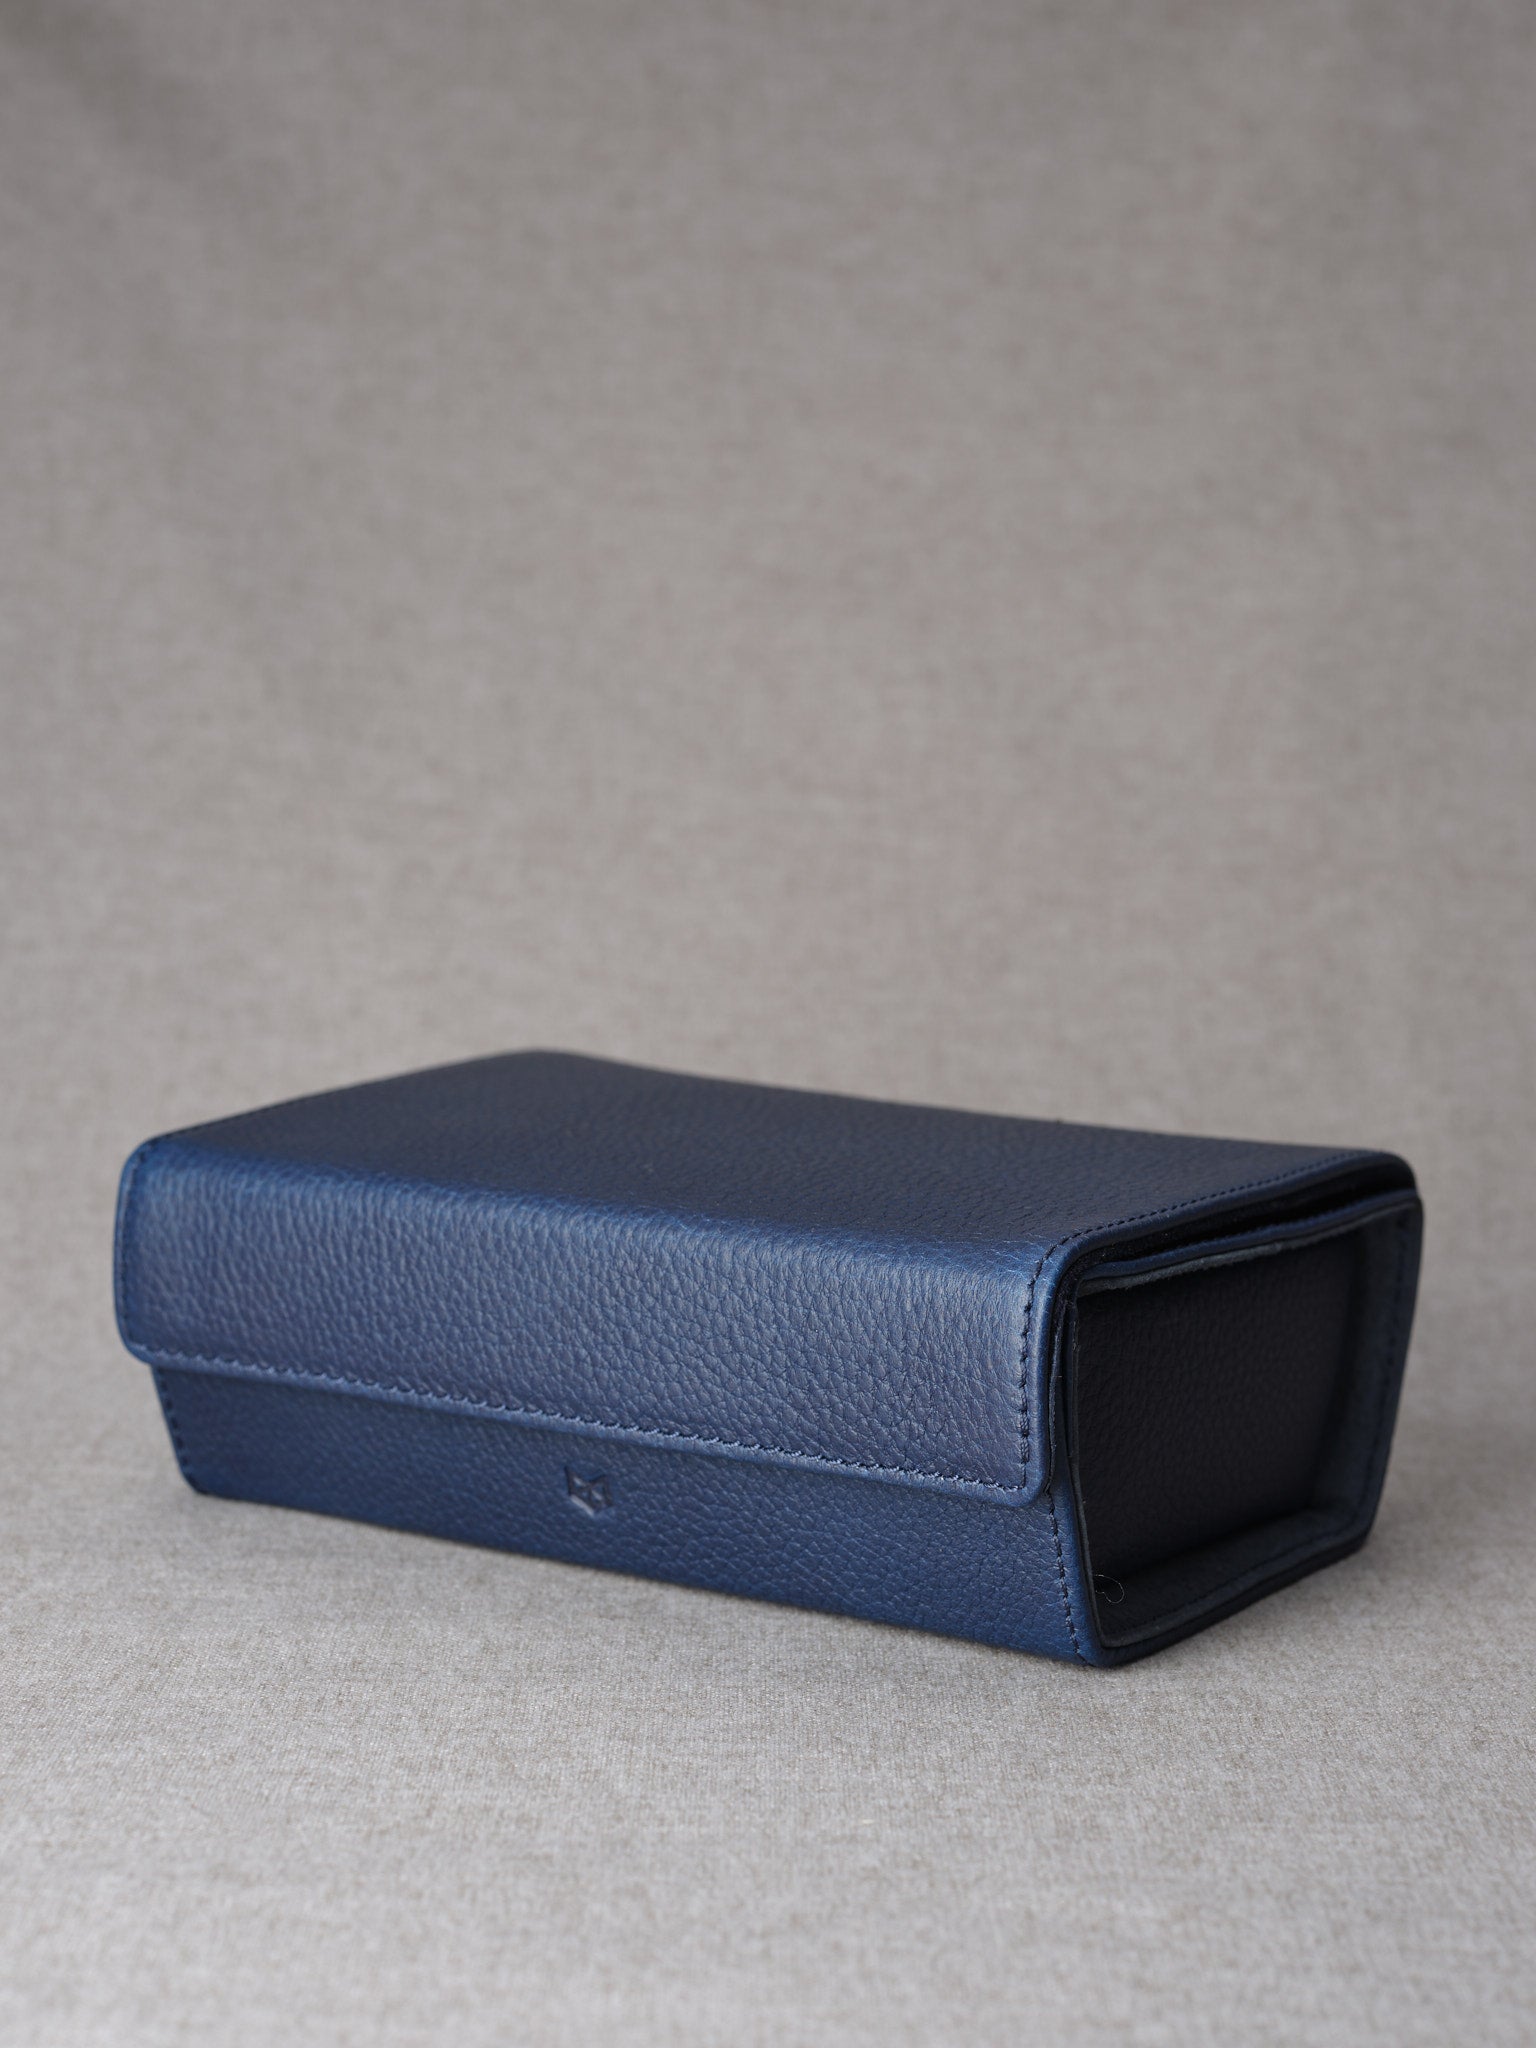 Jimmy Choo glasses case navy by Capra Leather